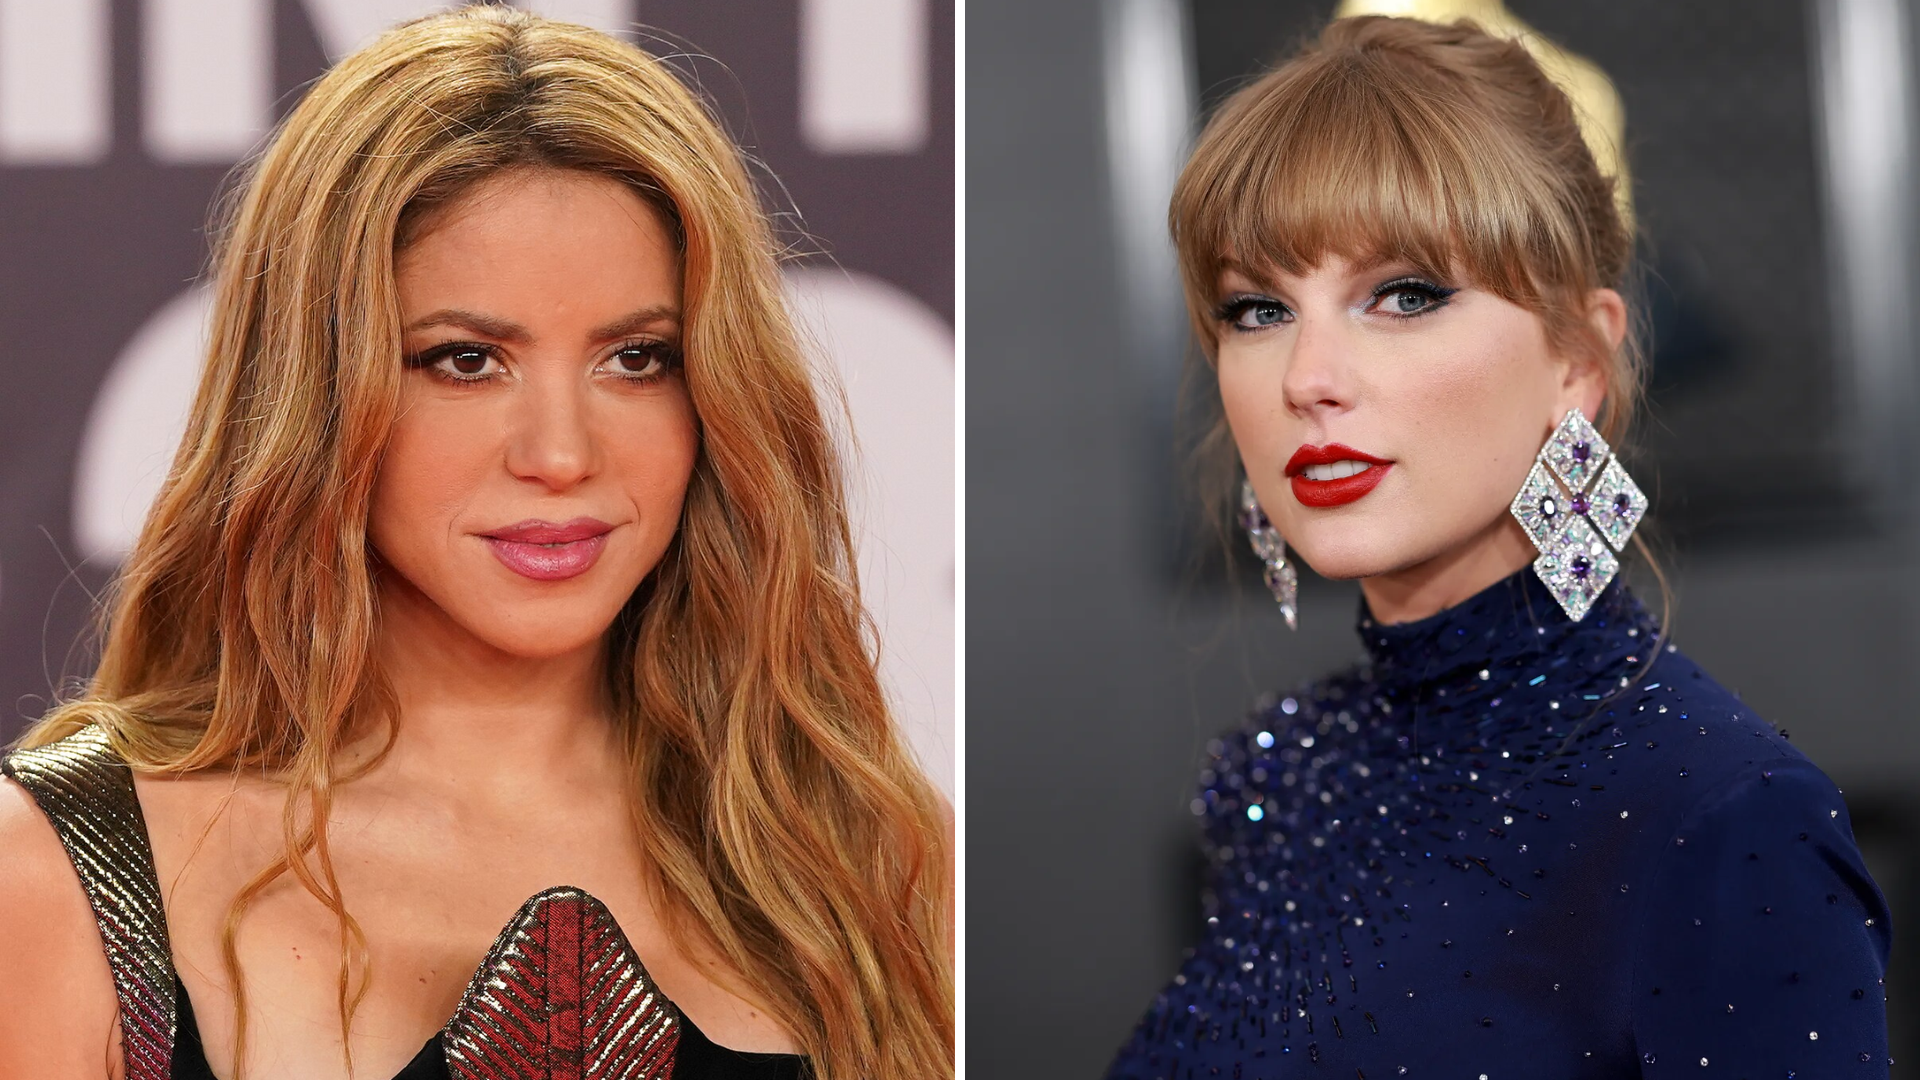 Shakira Expresses Her Wish To Collaborate With Taylor Swift And The Internet Can’t Keep Calm